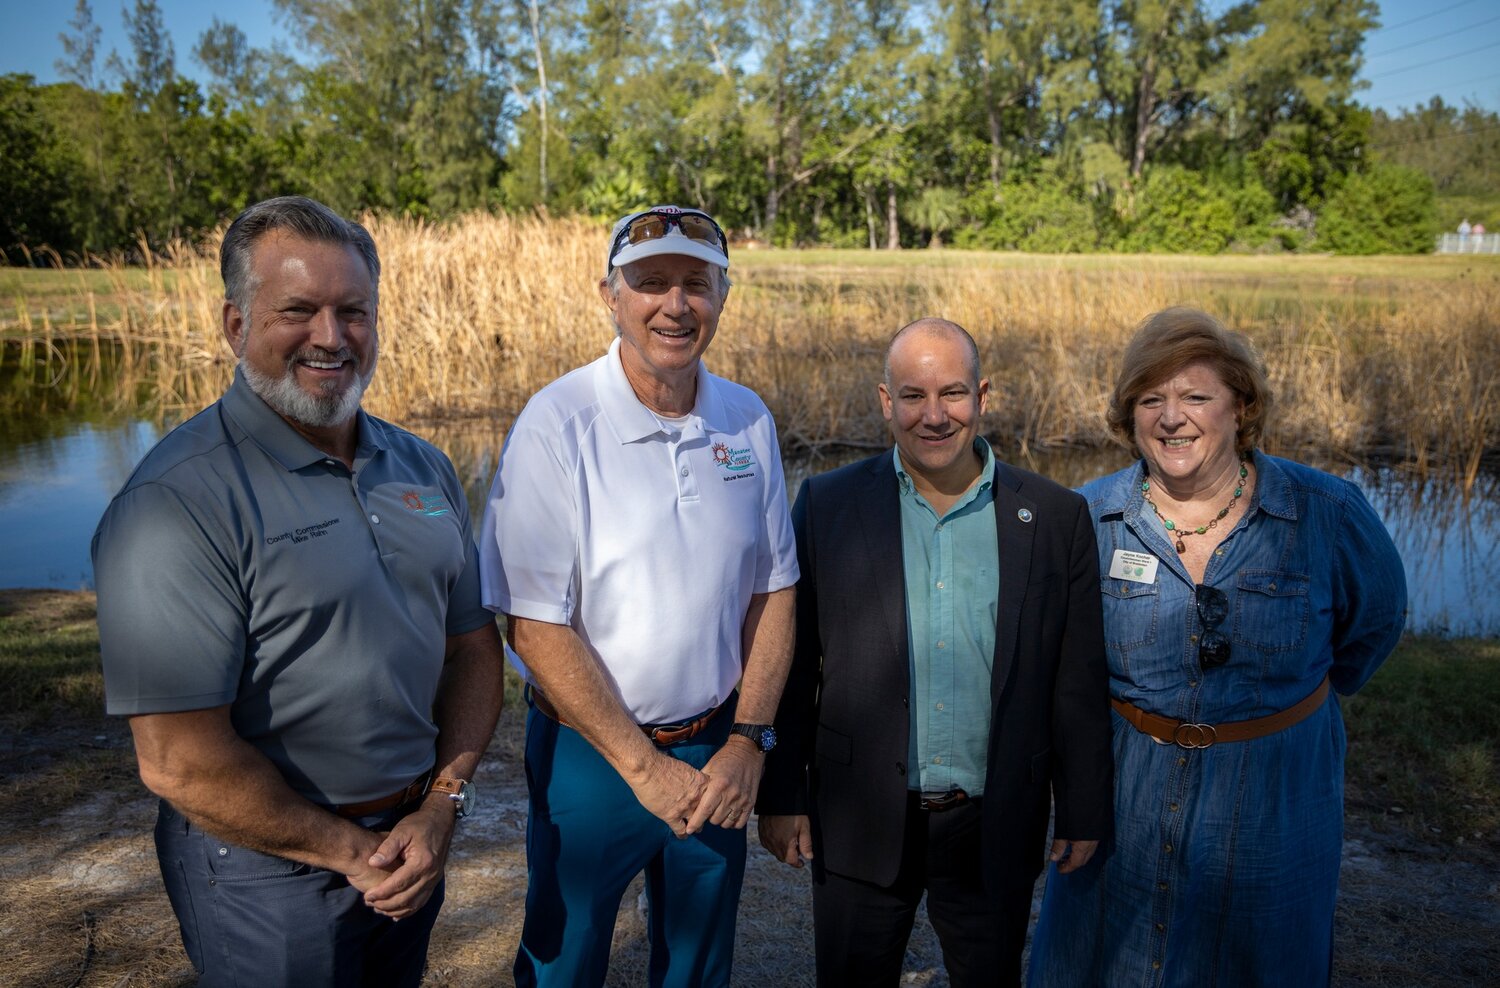 Manatee County Commission Chair Mike Rahn, Natural Resources Director Charlie Hunsicker, Commissioner Van Ostenbridge, and Bradenton City Councilwoman Jayne Kocher.